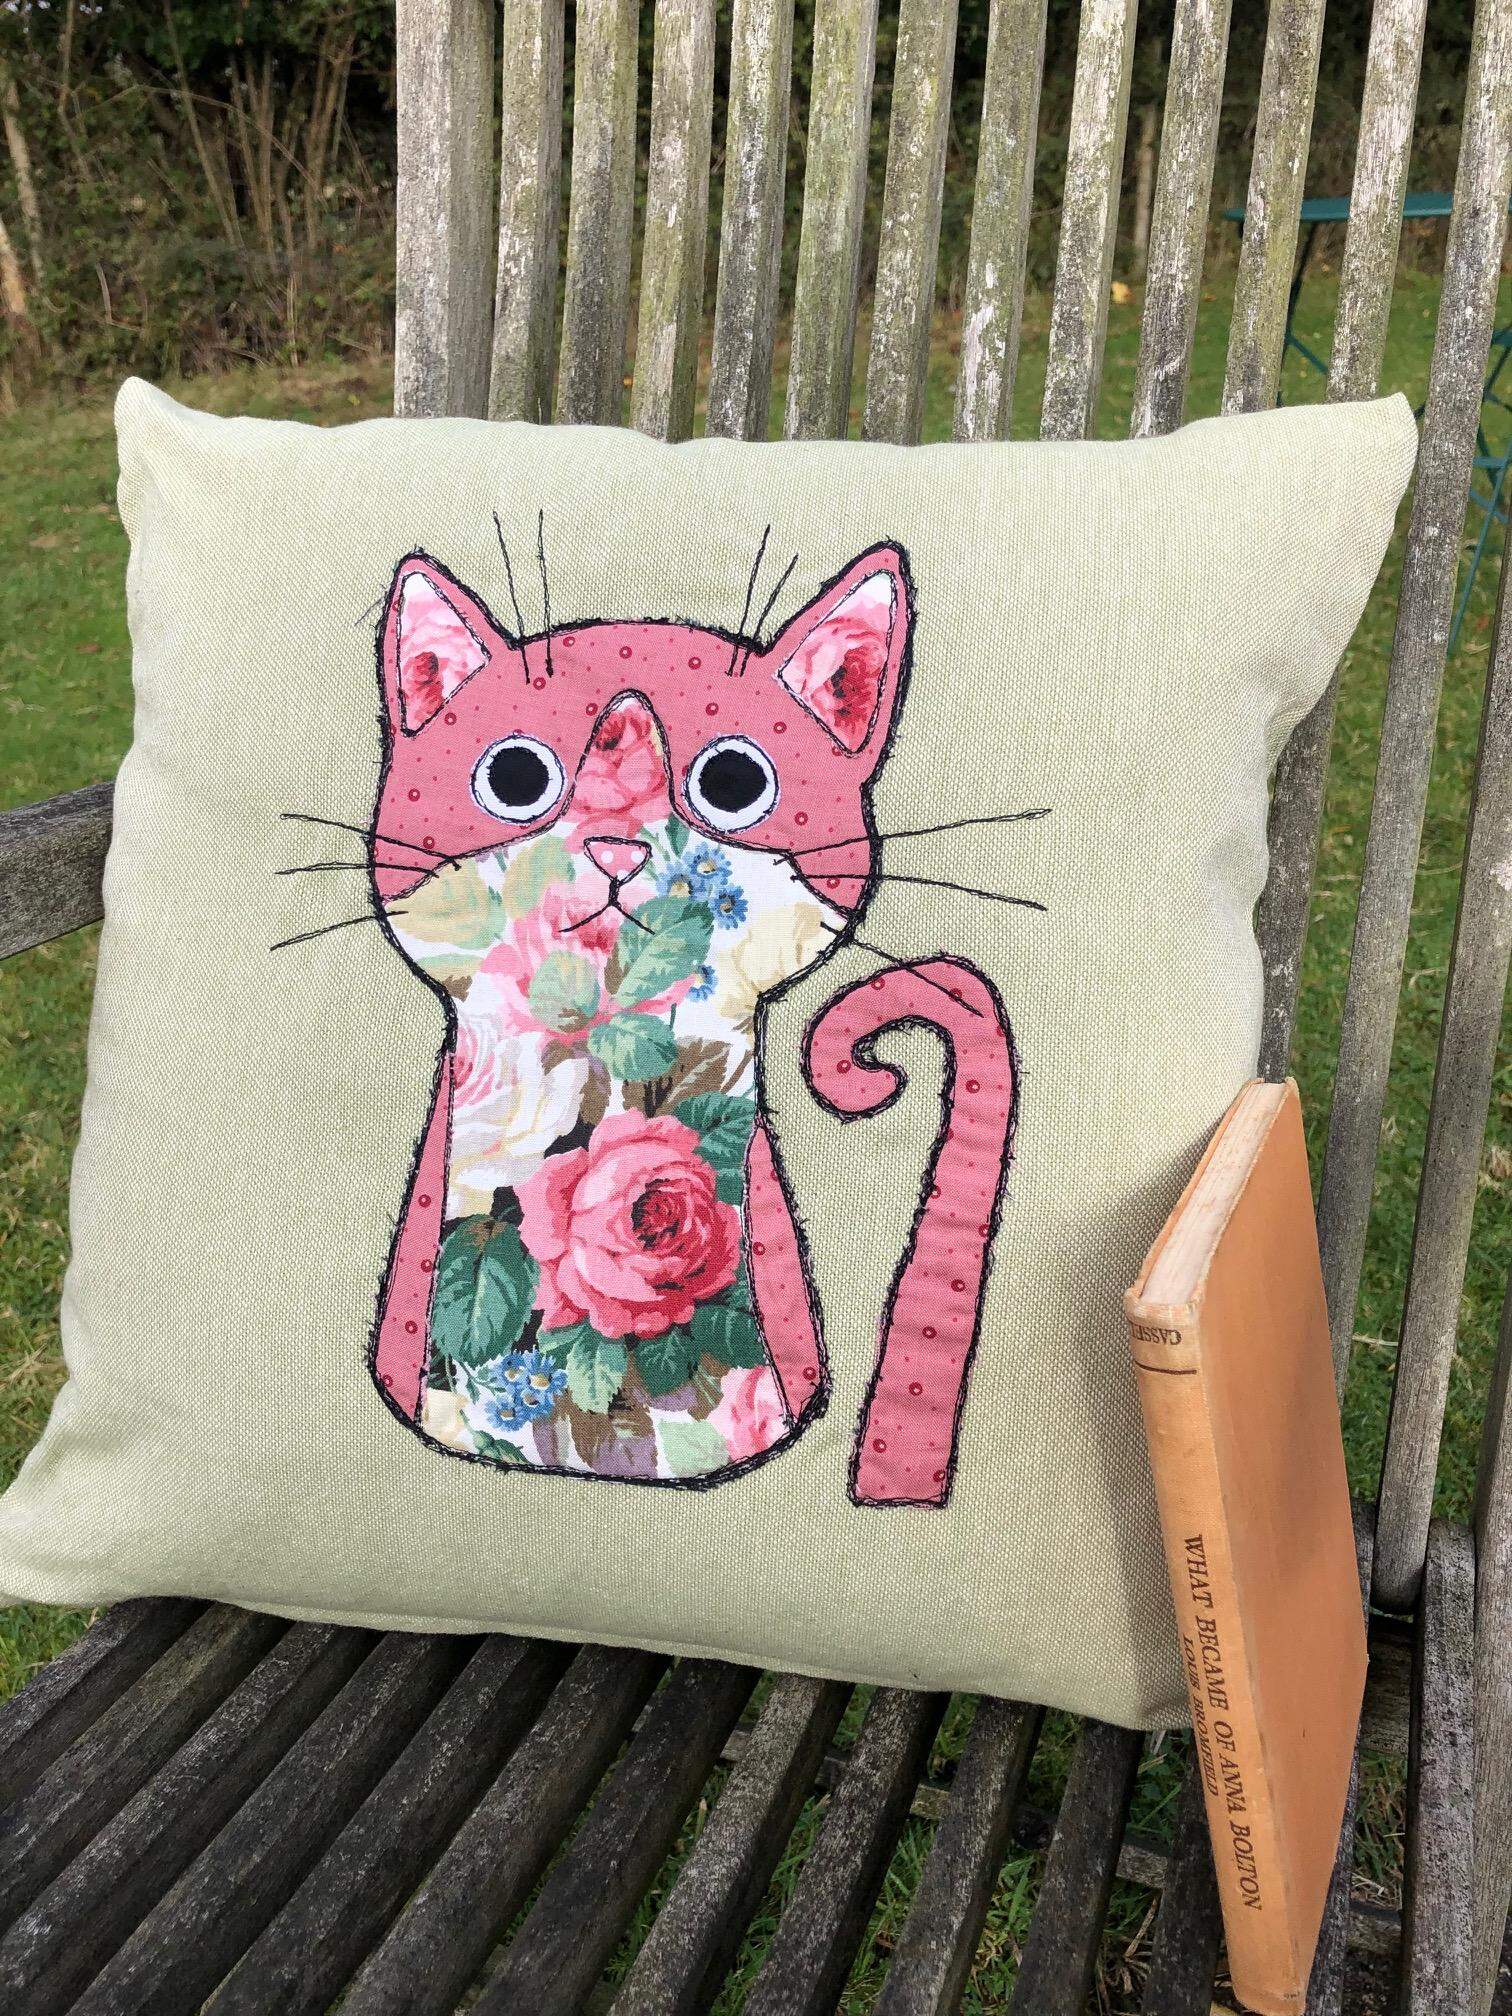 Free motion embroidered cat cushion. Can be customised - contact me for details.